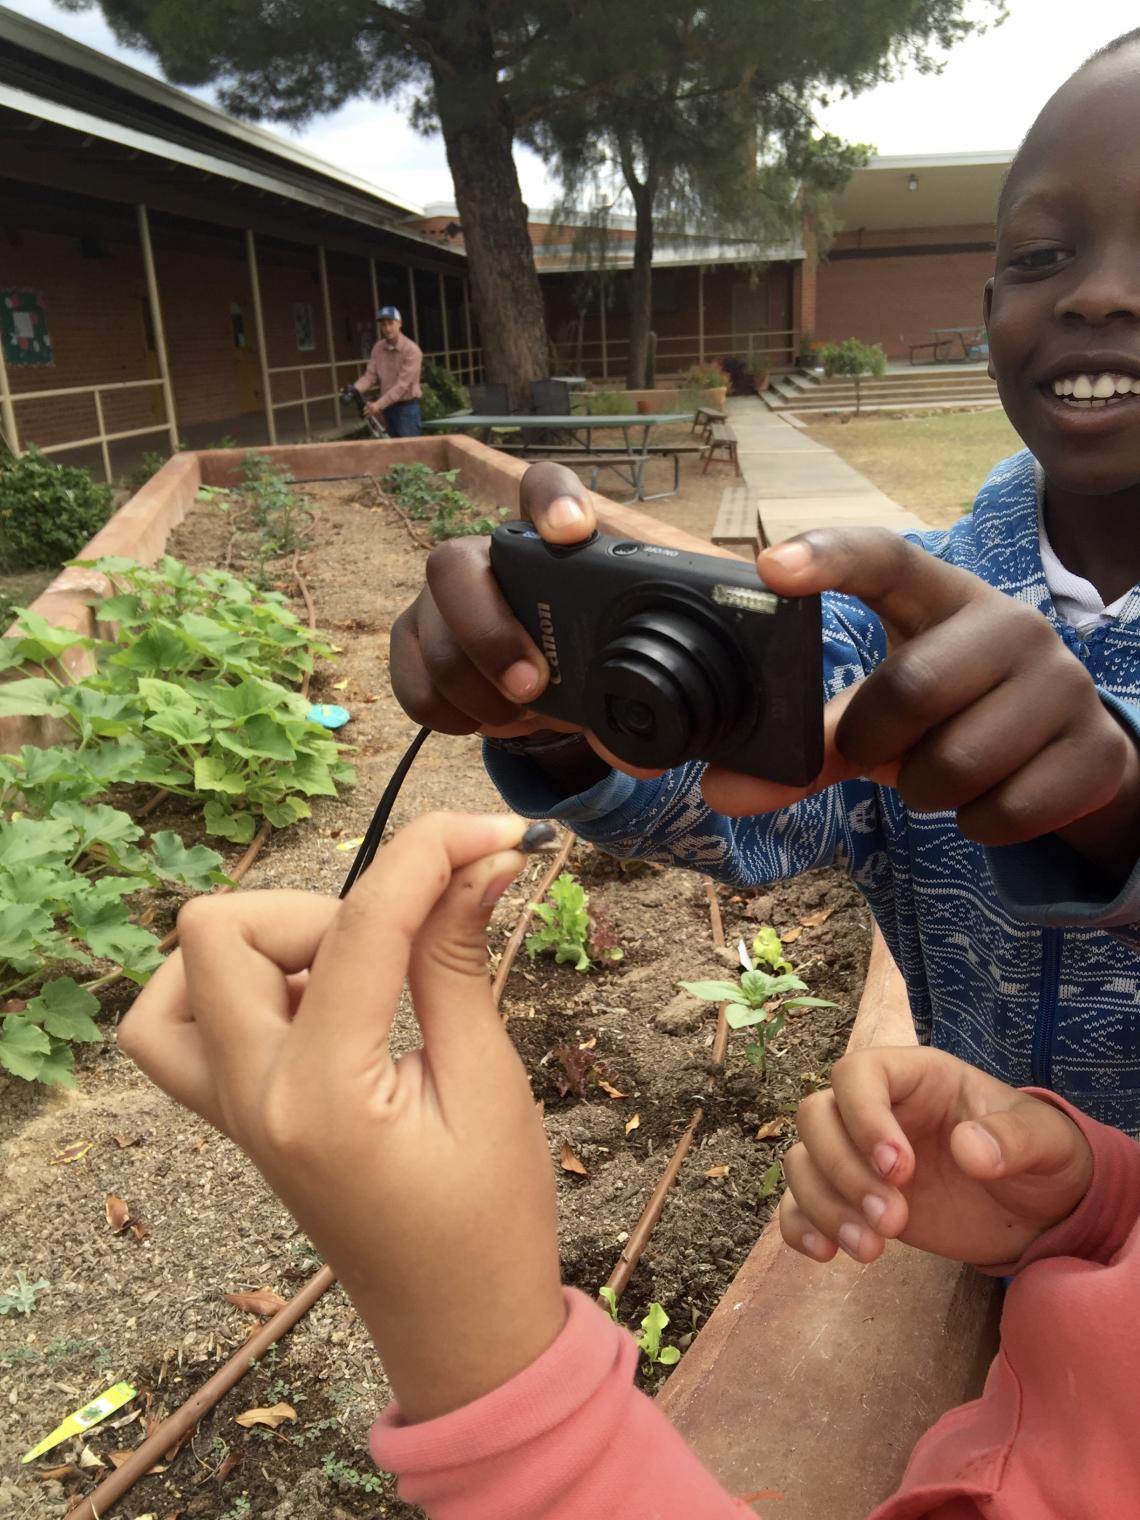 Image of a elementary-aged student taking a photo of a worm that another young student is holding